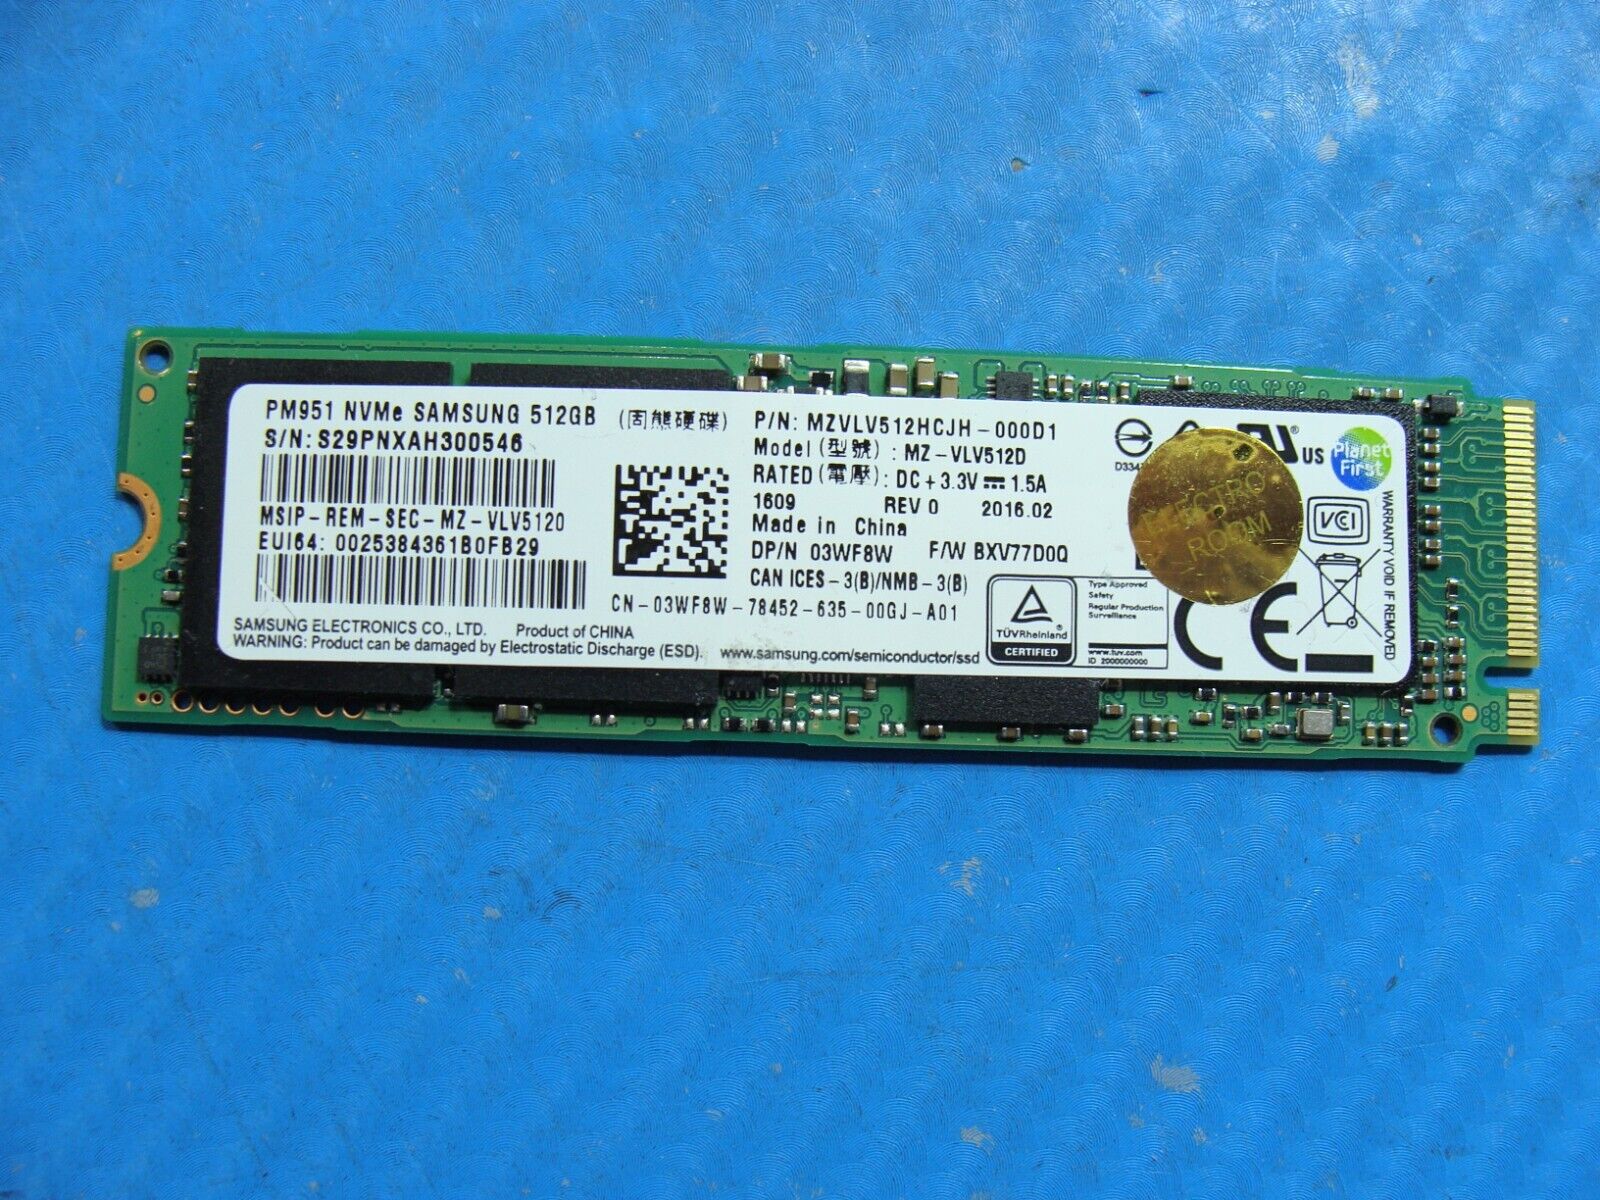 Dell 9550 Samsung 512GB M.2 NVMe SSD Solid State Drive MZVLV512HCJH-000D1 03WF8W